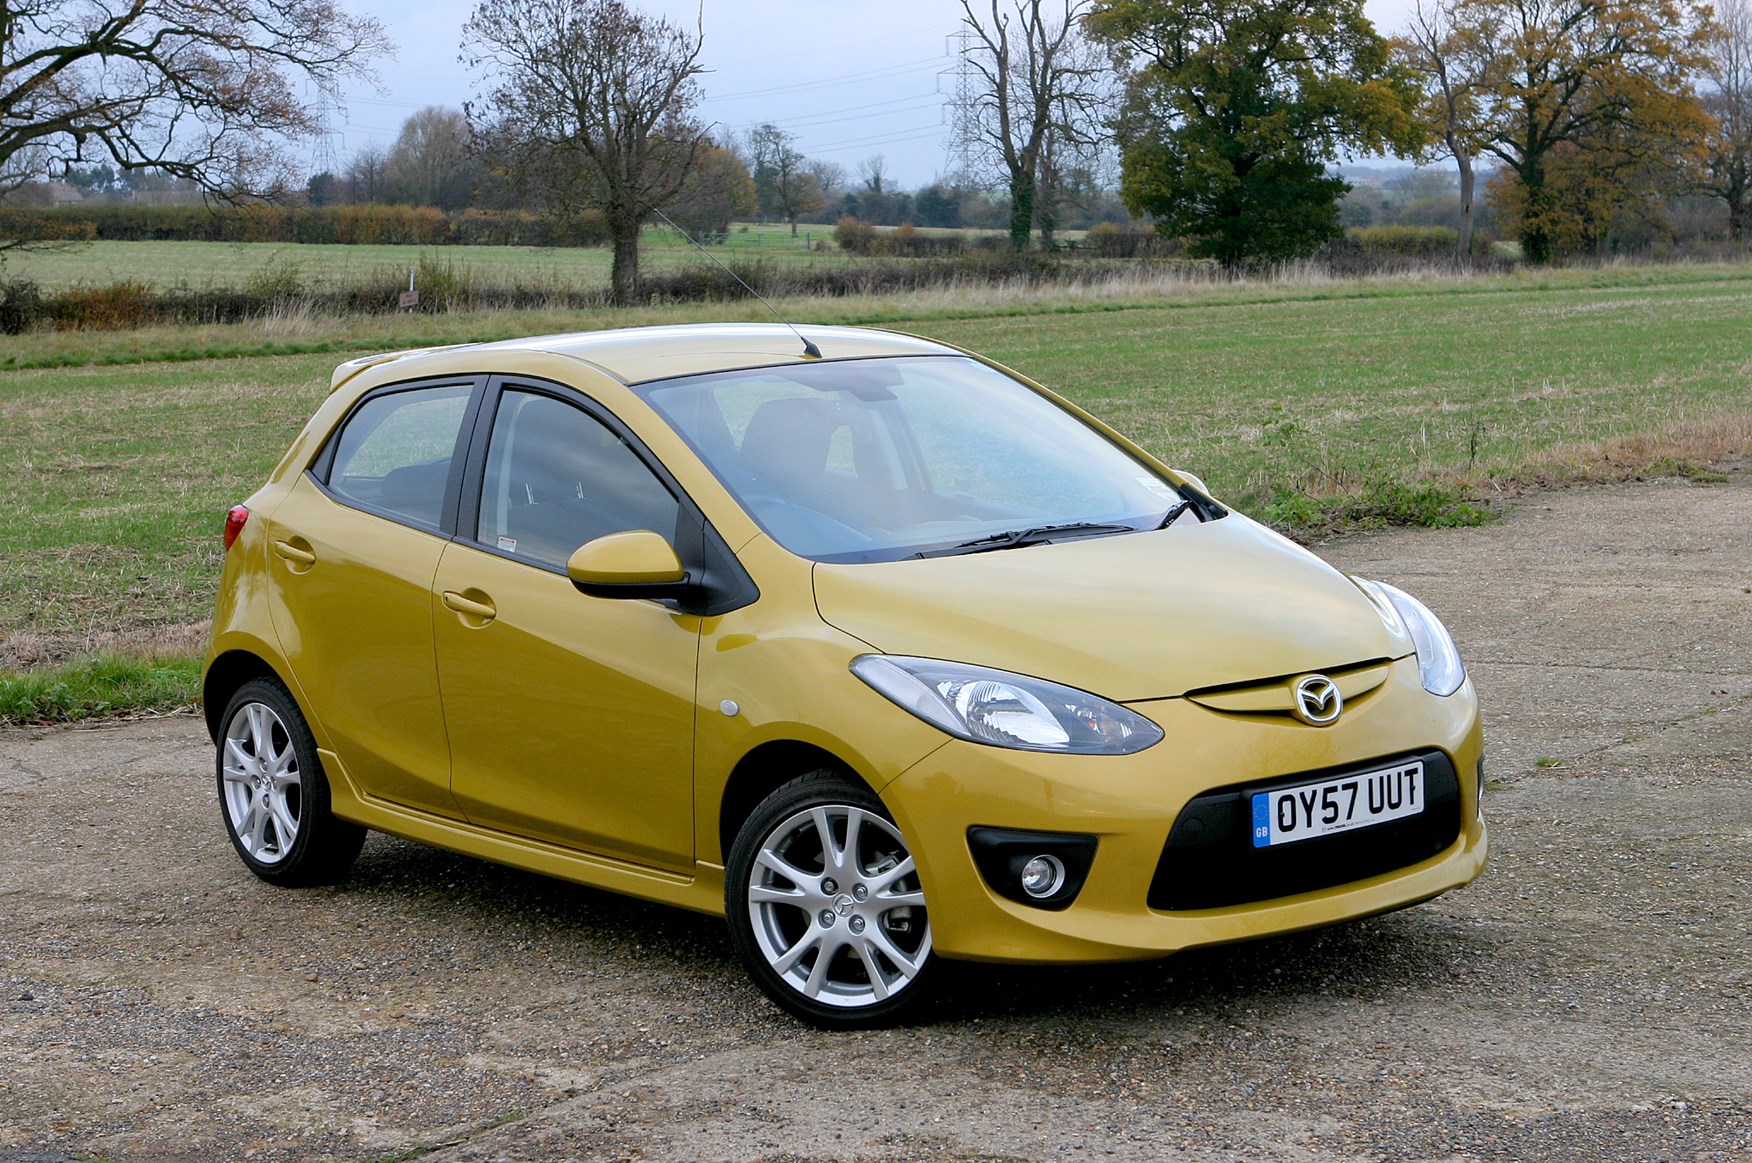 Used Mazda 2 Hatchback (2007 - 2015) Review | Parkers